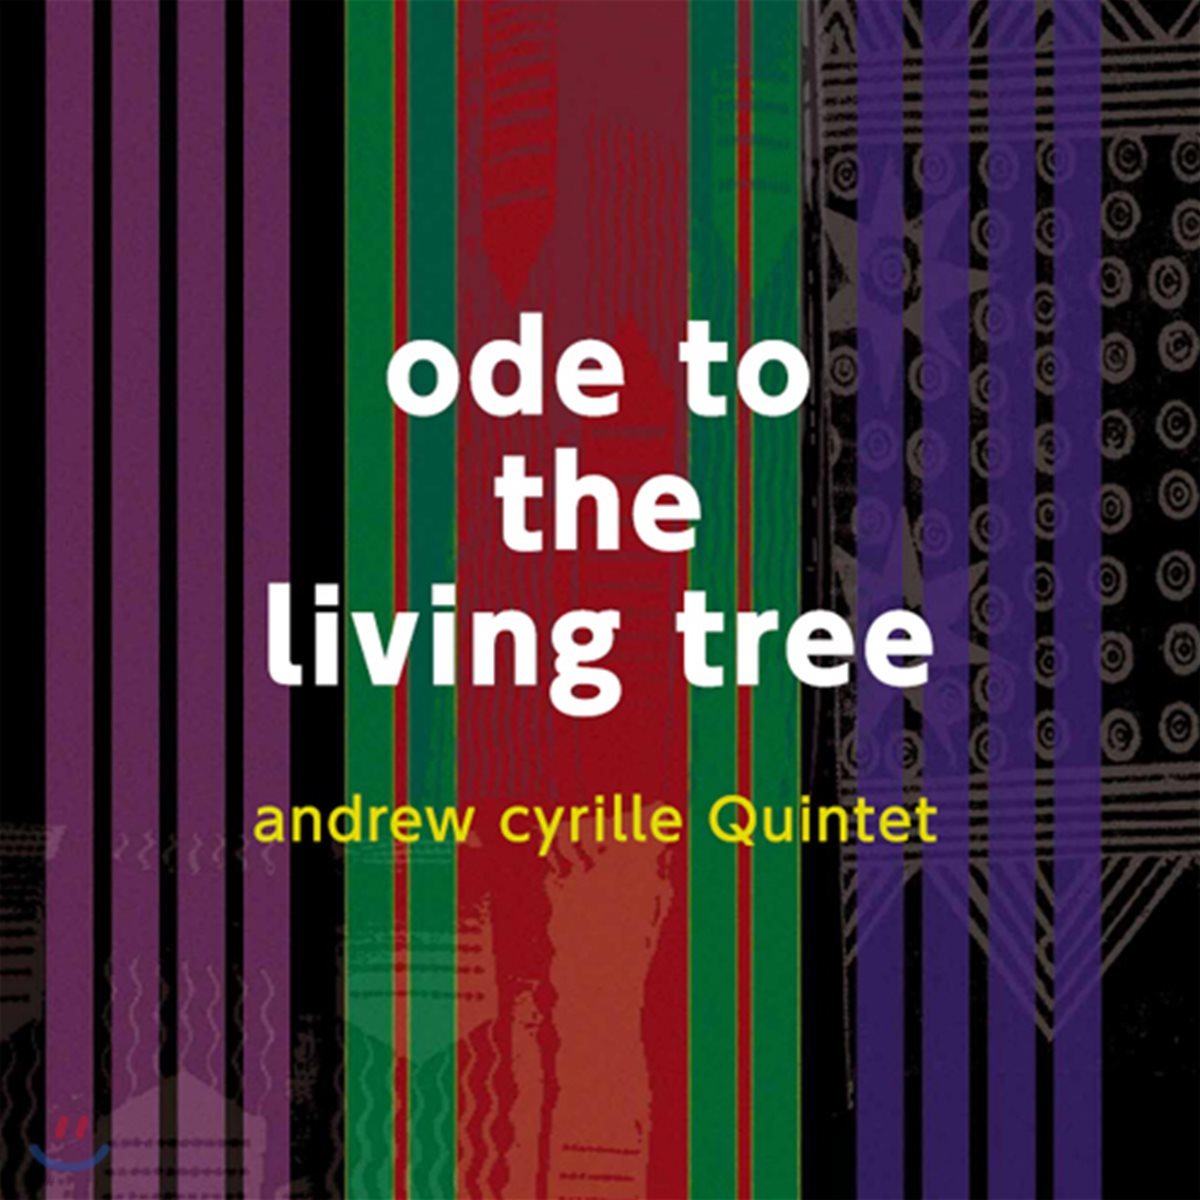 Andrew Cyrille Quintet (앤드류 시릴 퀸텟) - Ode To The Living Tree [LP]